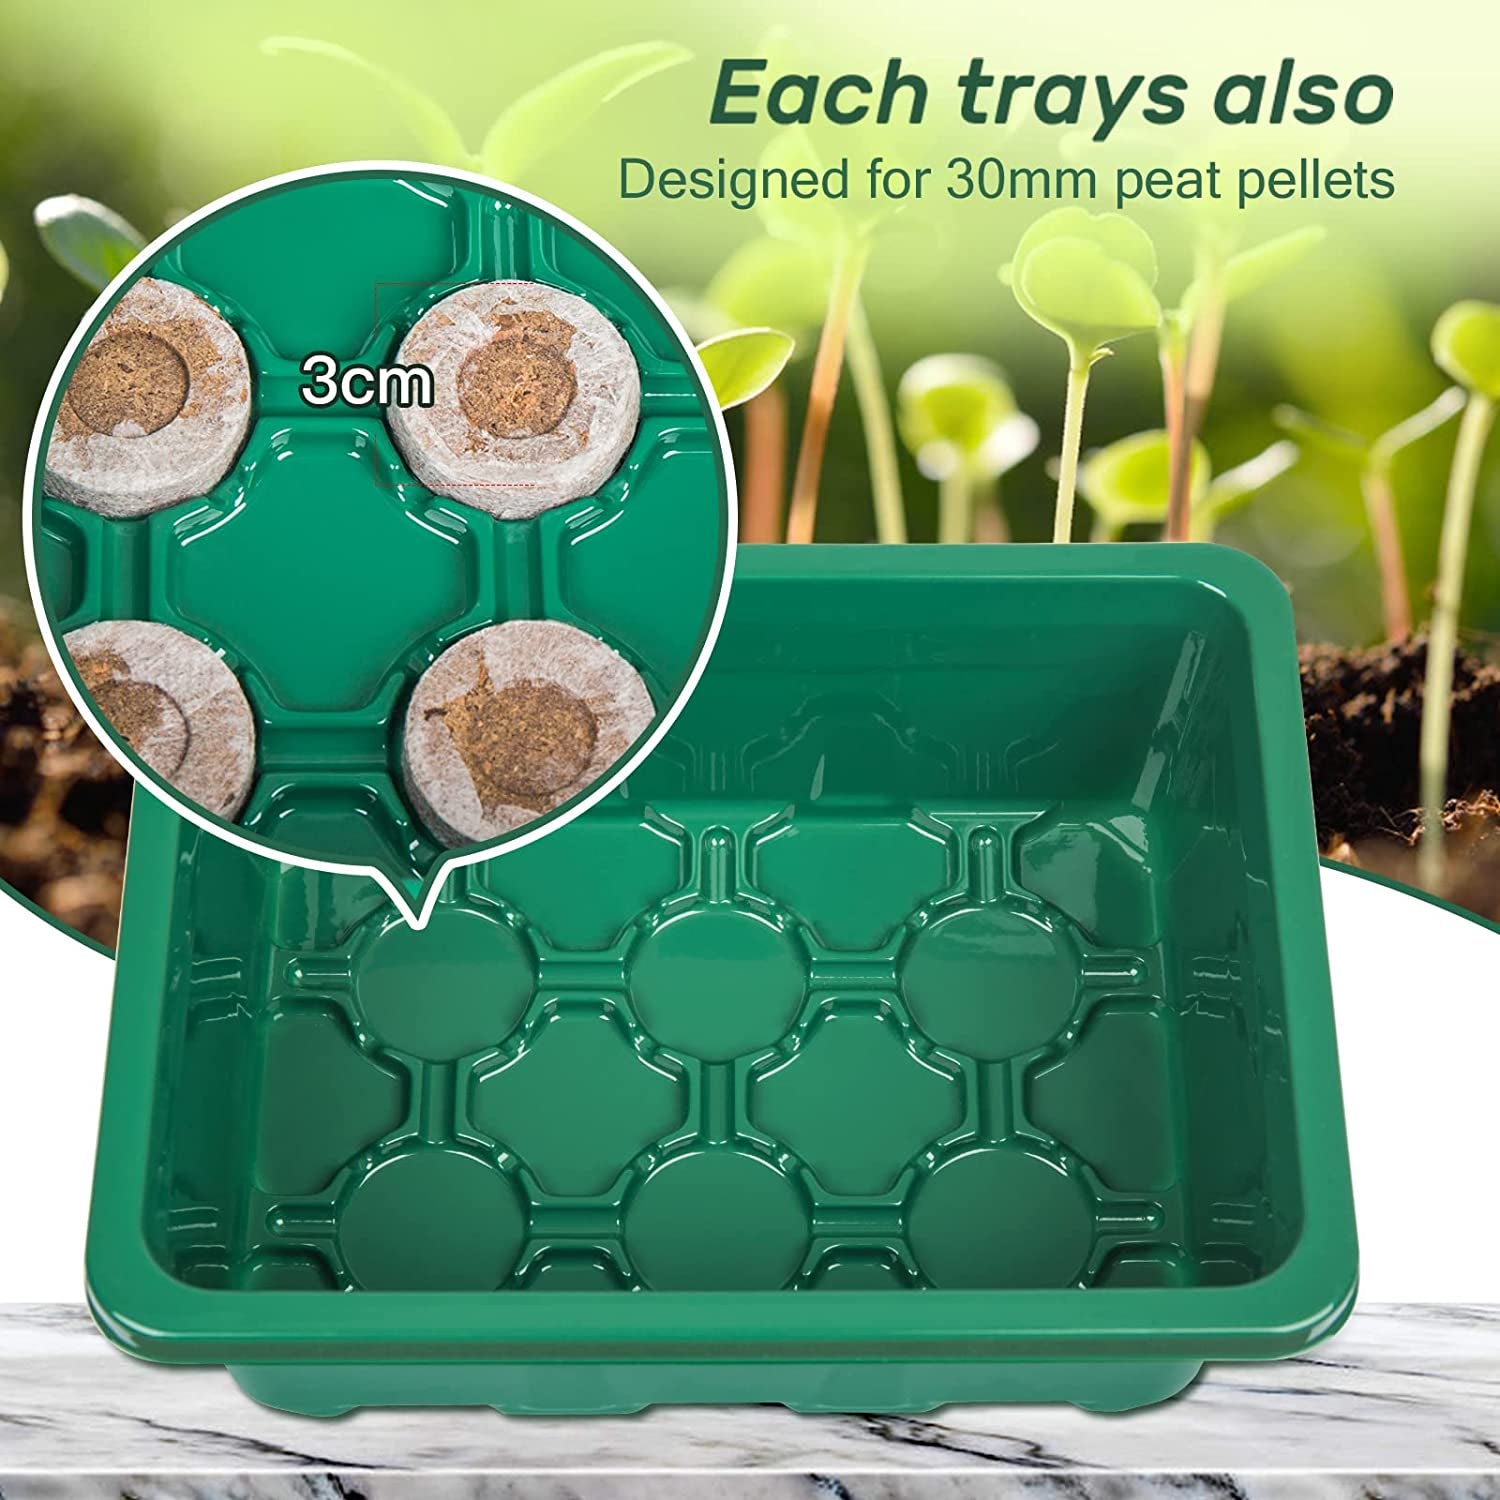 10 Packs Seed Starter Tray Seedling Tray (12 Cells per Tray) Humidity Adjustable Plant Starter Kit with Dome and Base Greenhouse Grow Trays for Seeds Growing Starting